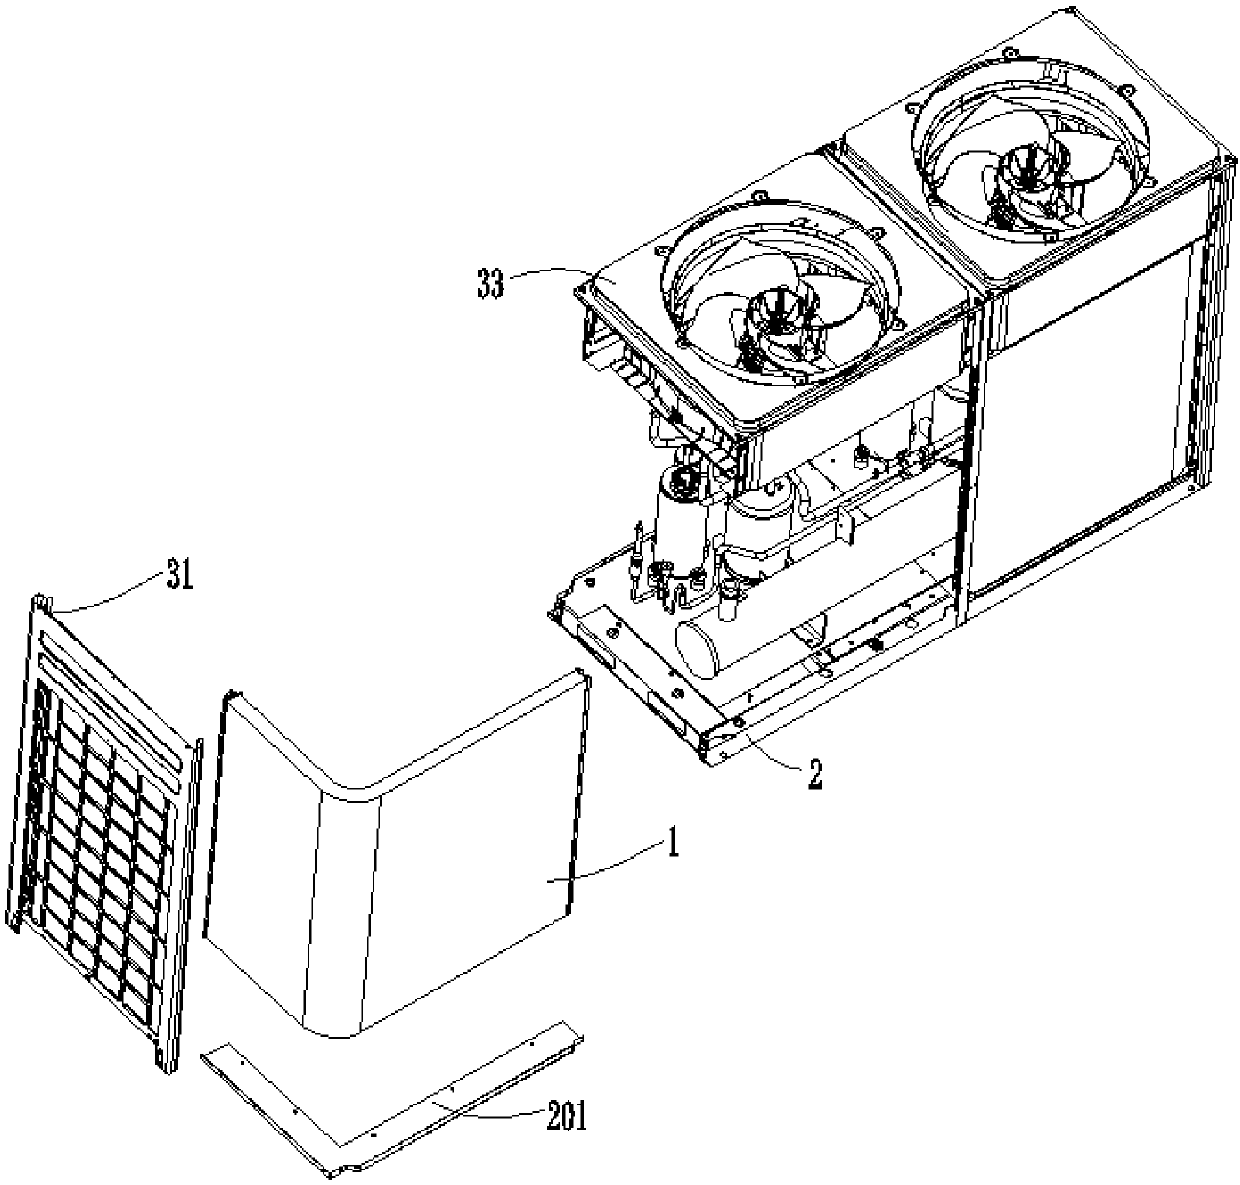 Air conditioning equipment and base thereof